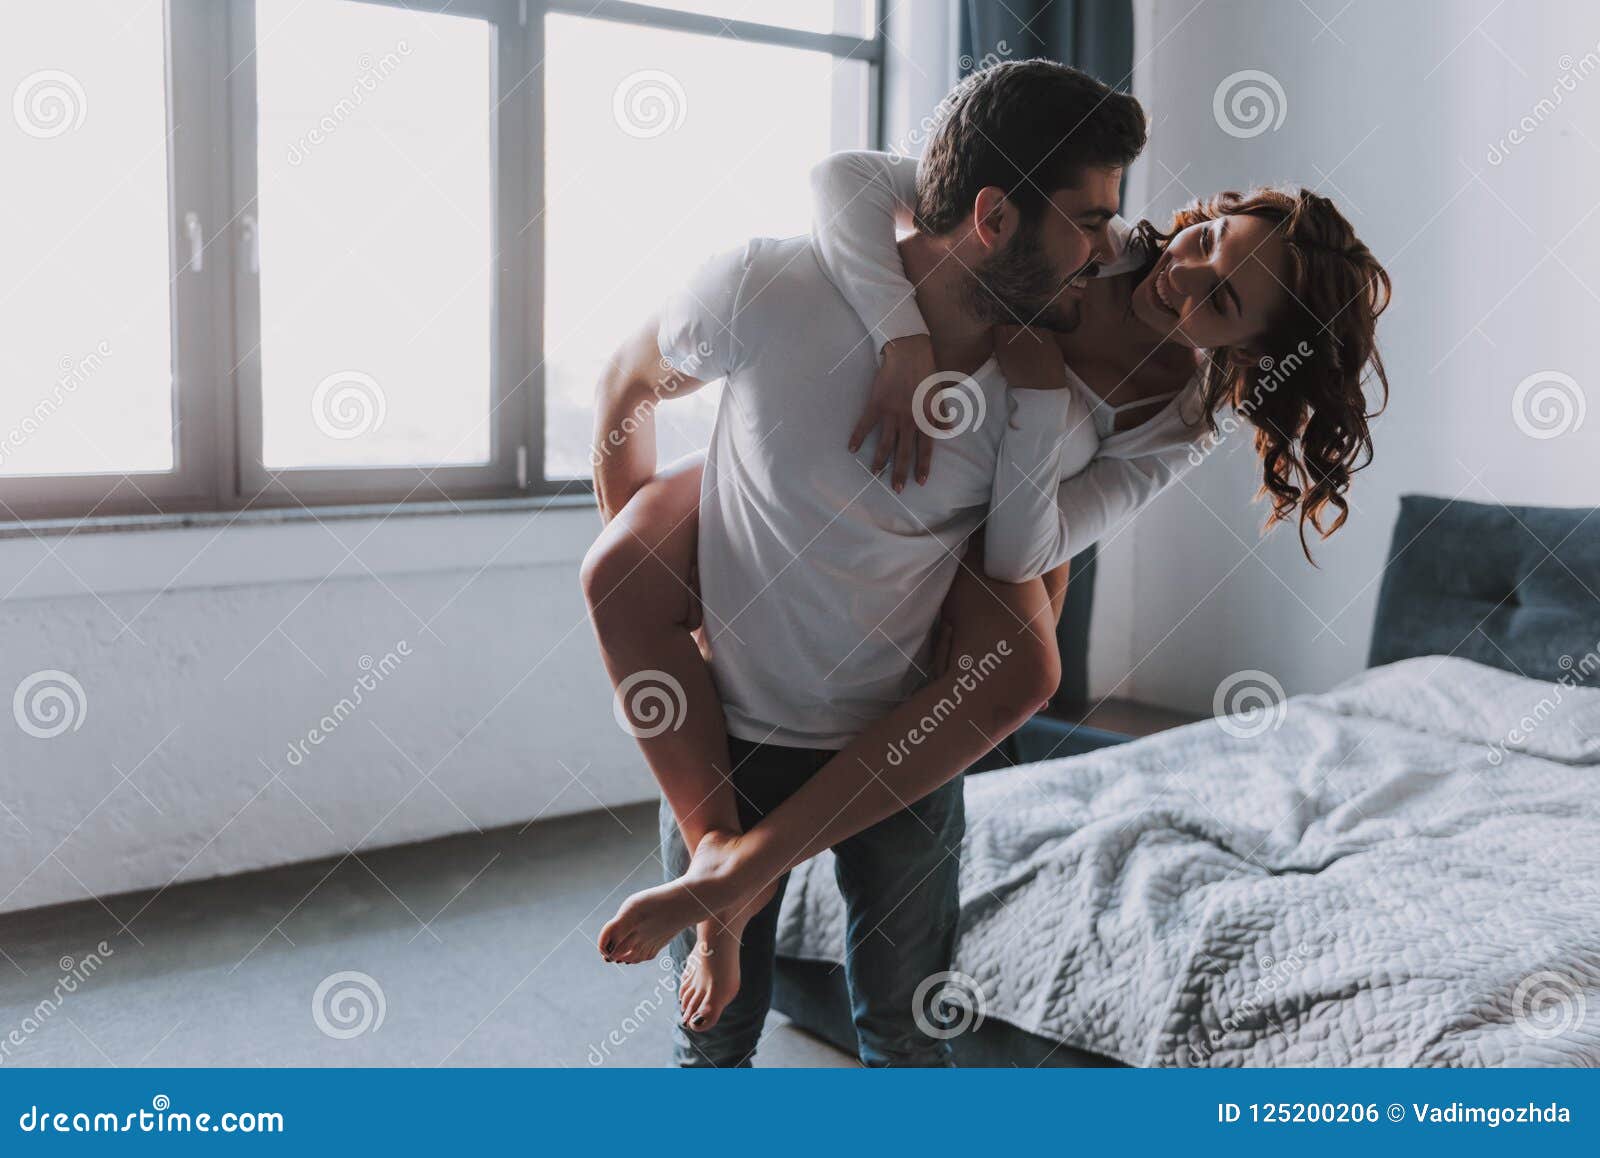 Happy Couple Together Having Fun in Bedroom Stock Photo